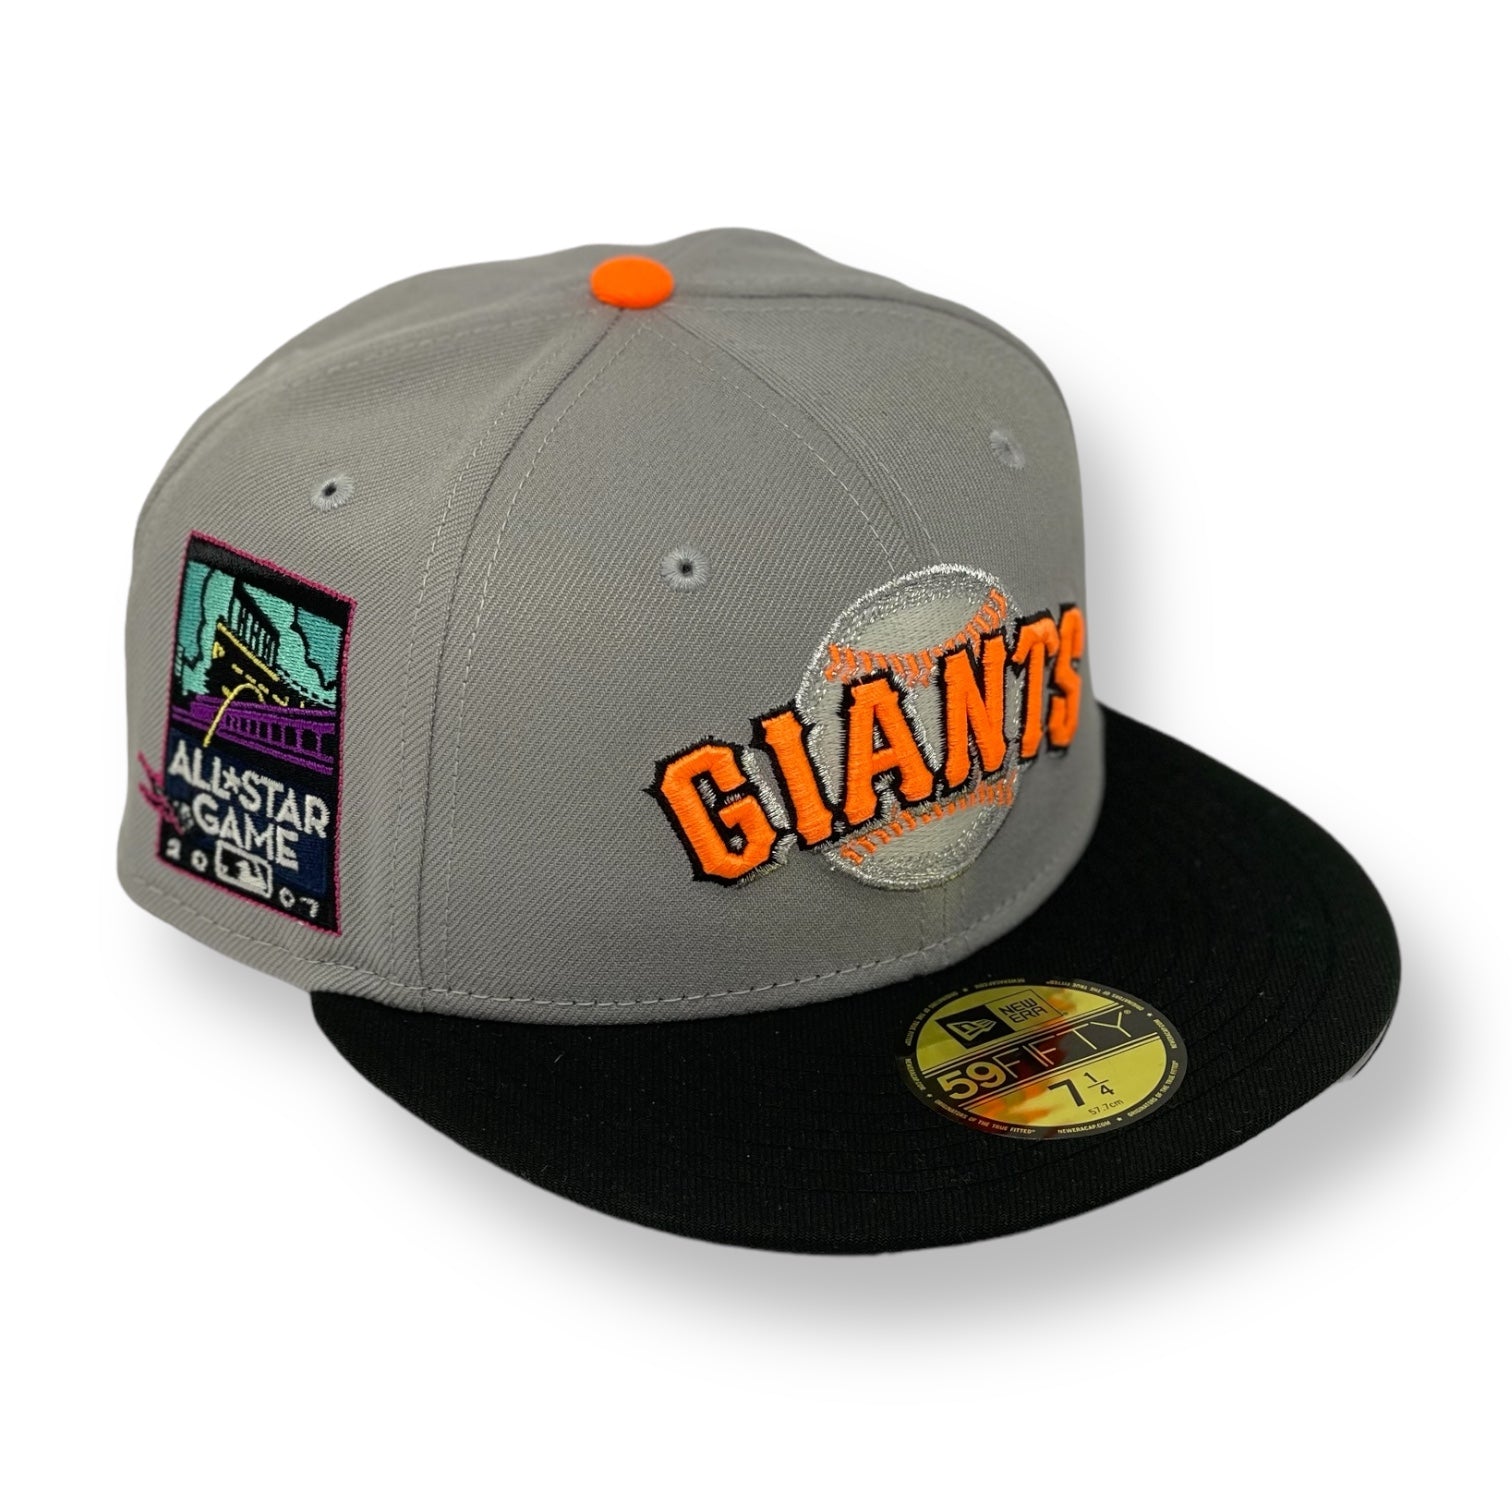 SAN FRANCISCO GIANTS (GREY) (2007 ALLSTARGAME) NEW ERA 59FIFTY FITTED